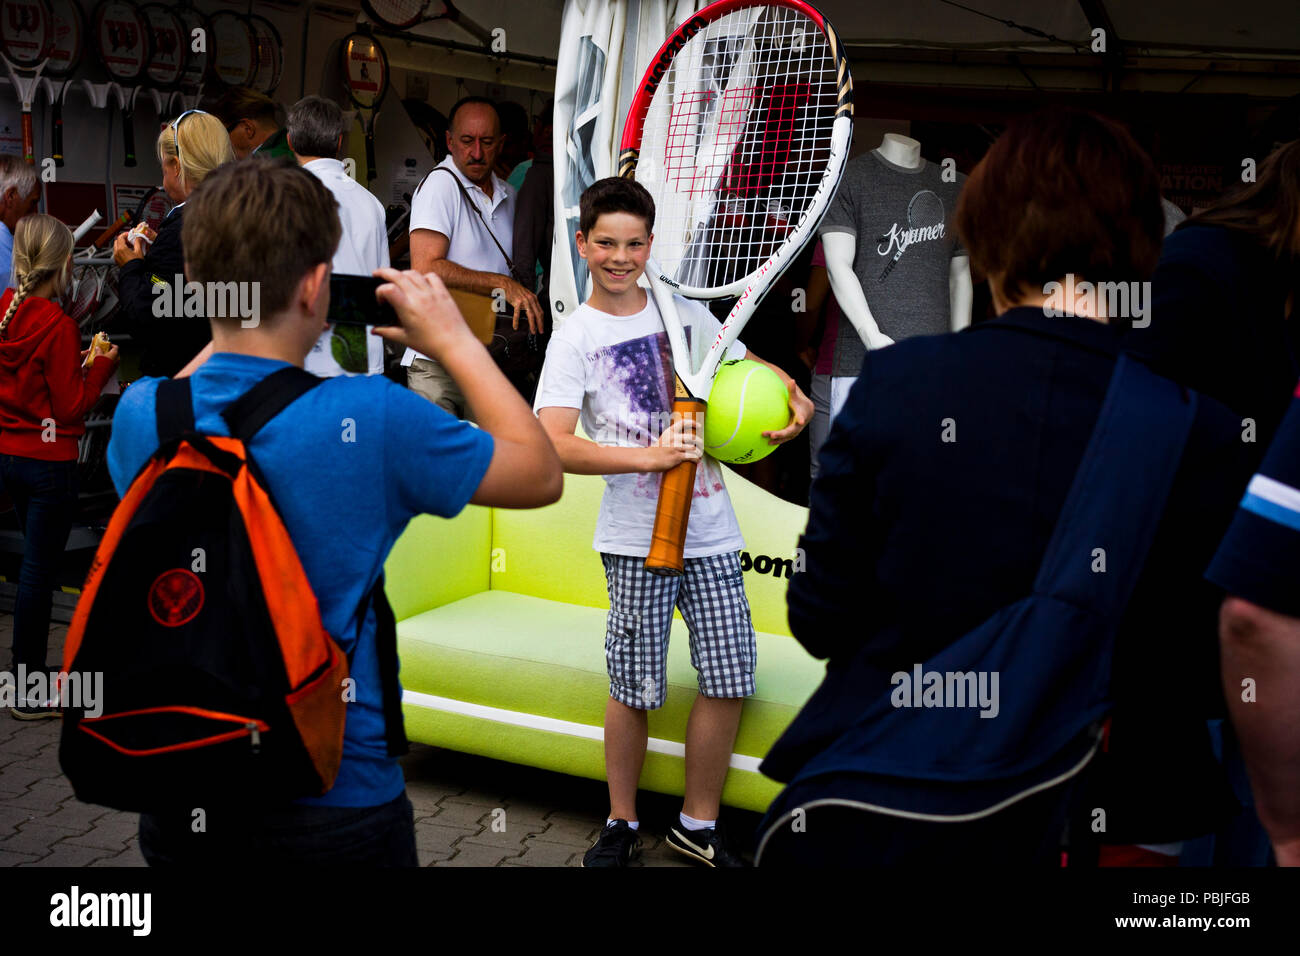 A young fan poses for a photograph with an oversized tennis racket and ball  at the Gerry Weber Stadion in Halle (Westfalen), Germany Stock Photo - Alamy